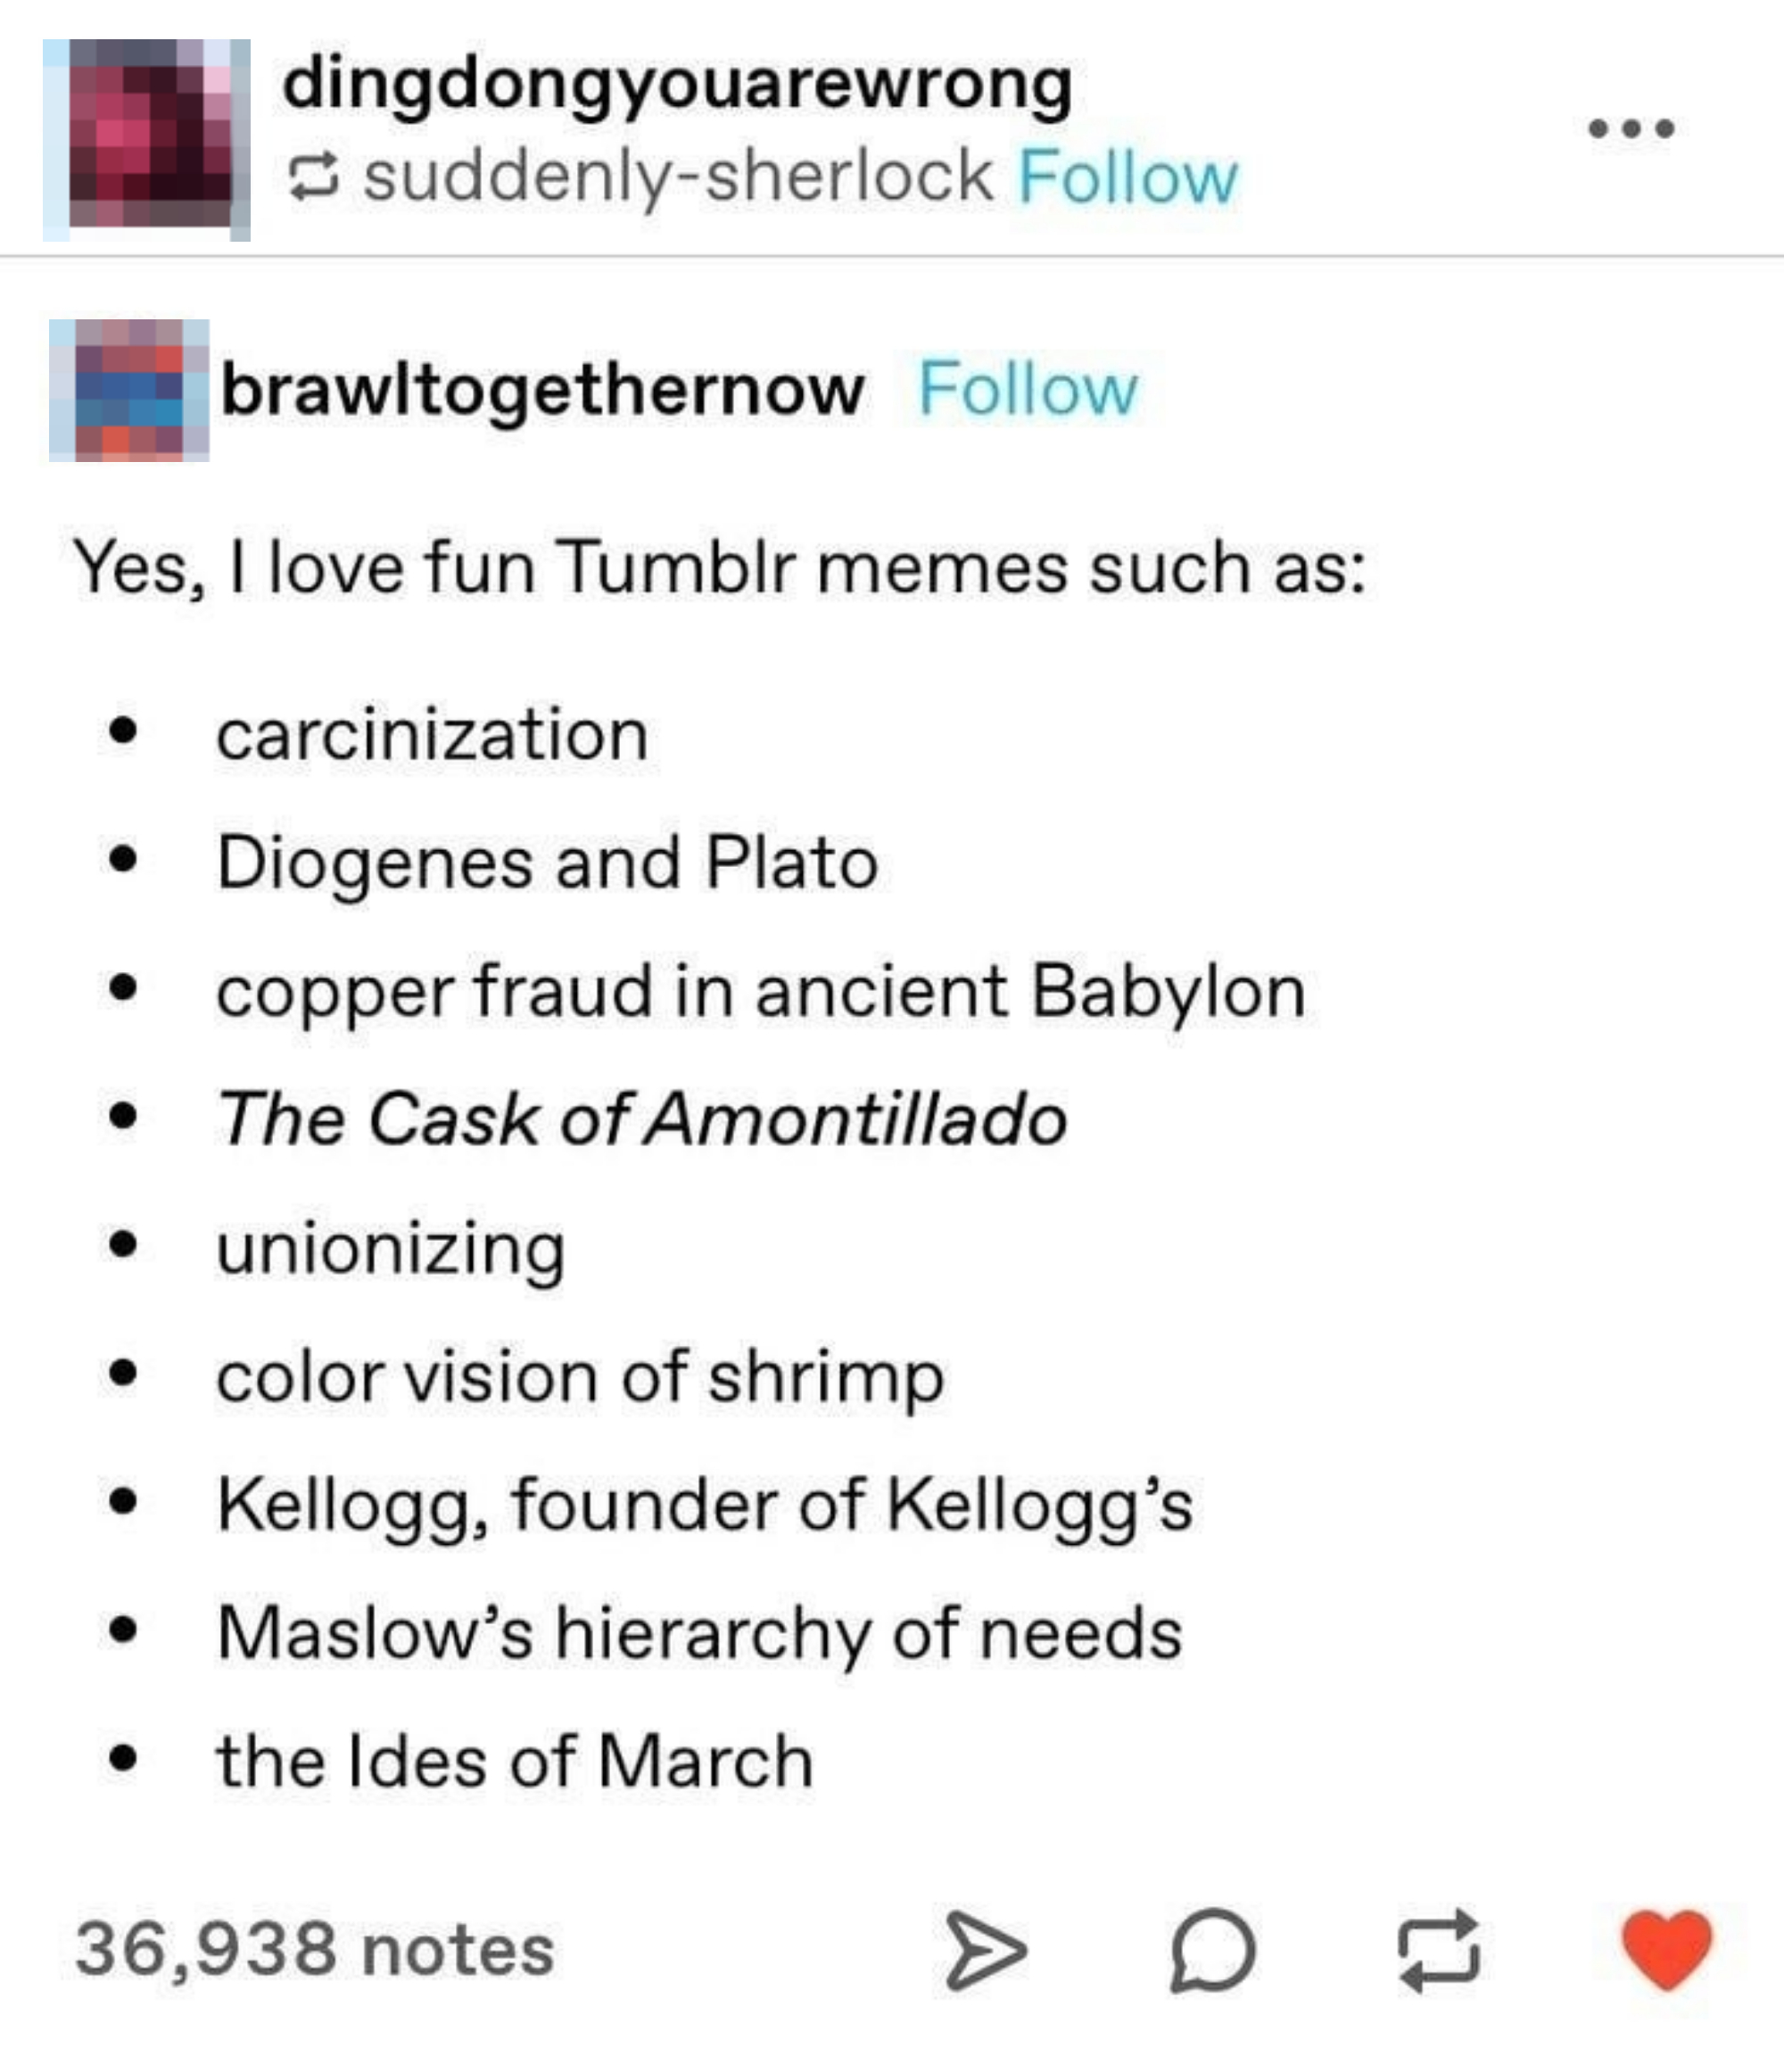 Meme with a list of humorous and incorrect historical terms